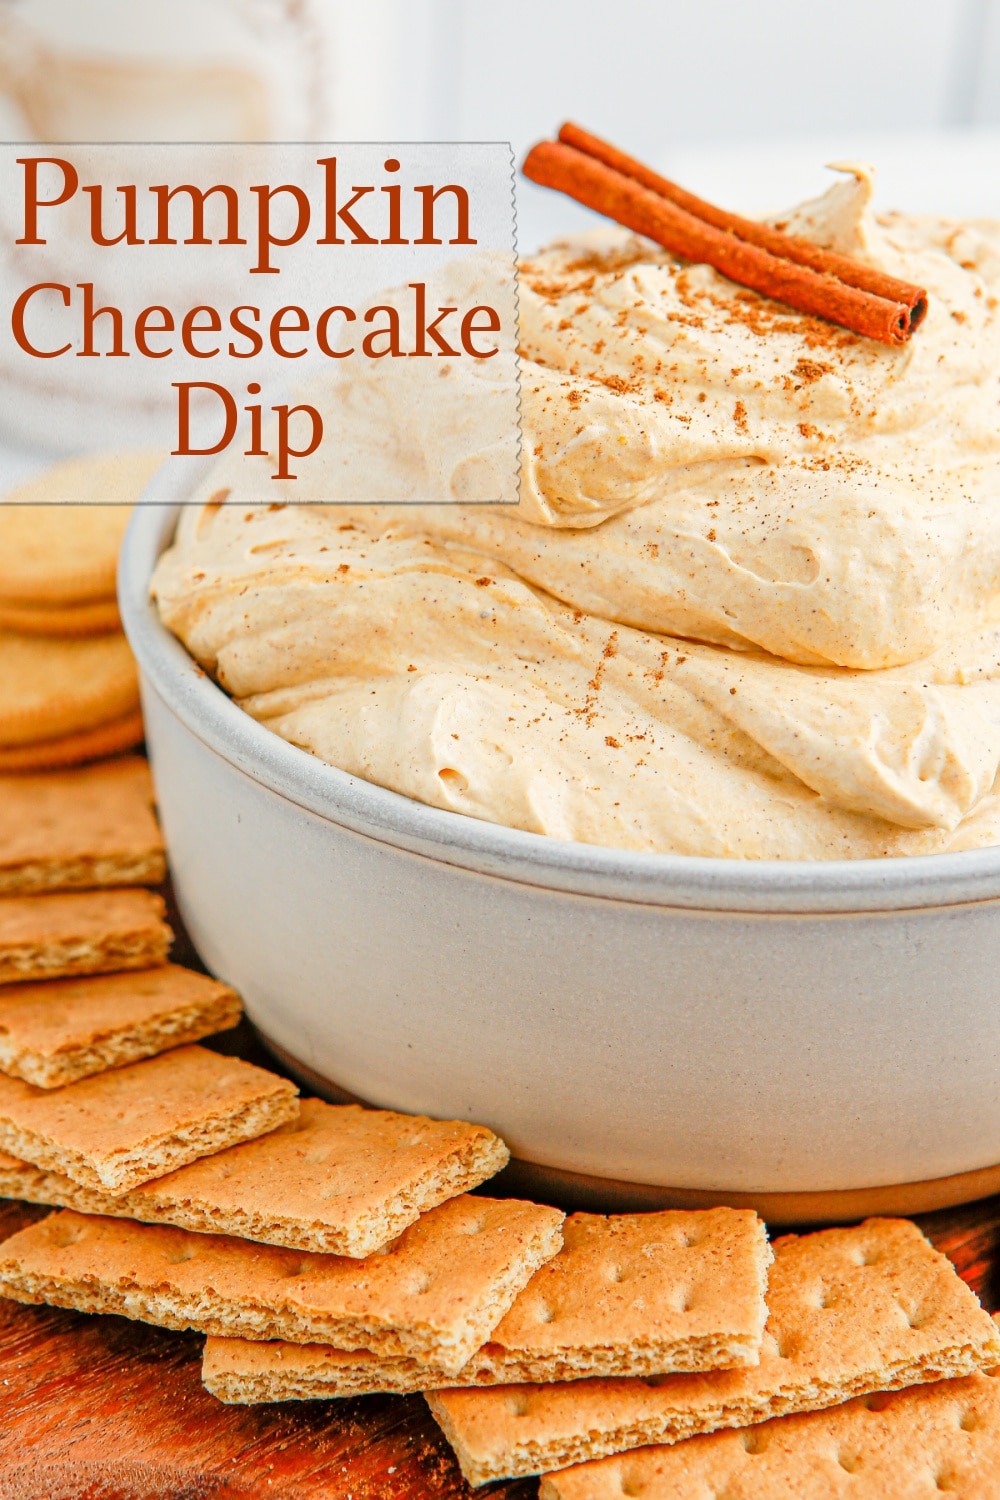 This Pumpkin Cheesecake Dip combines the warm, comforting spices reminiscent of traditional pumpkin pie with the smooth, creamy and luscious richness of a scoopable, cheesecake filling. The possibilities for dippables are endless, allowing you to unleash your creativity and use what you love. This is a dessert dip your family is going to love. via @cmpollak1